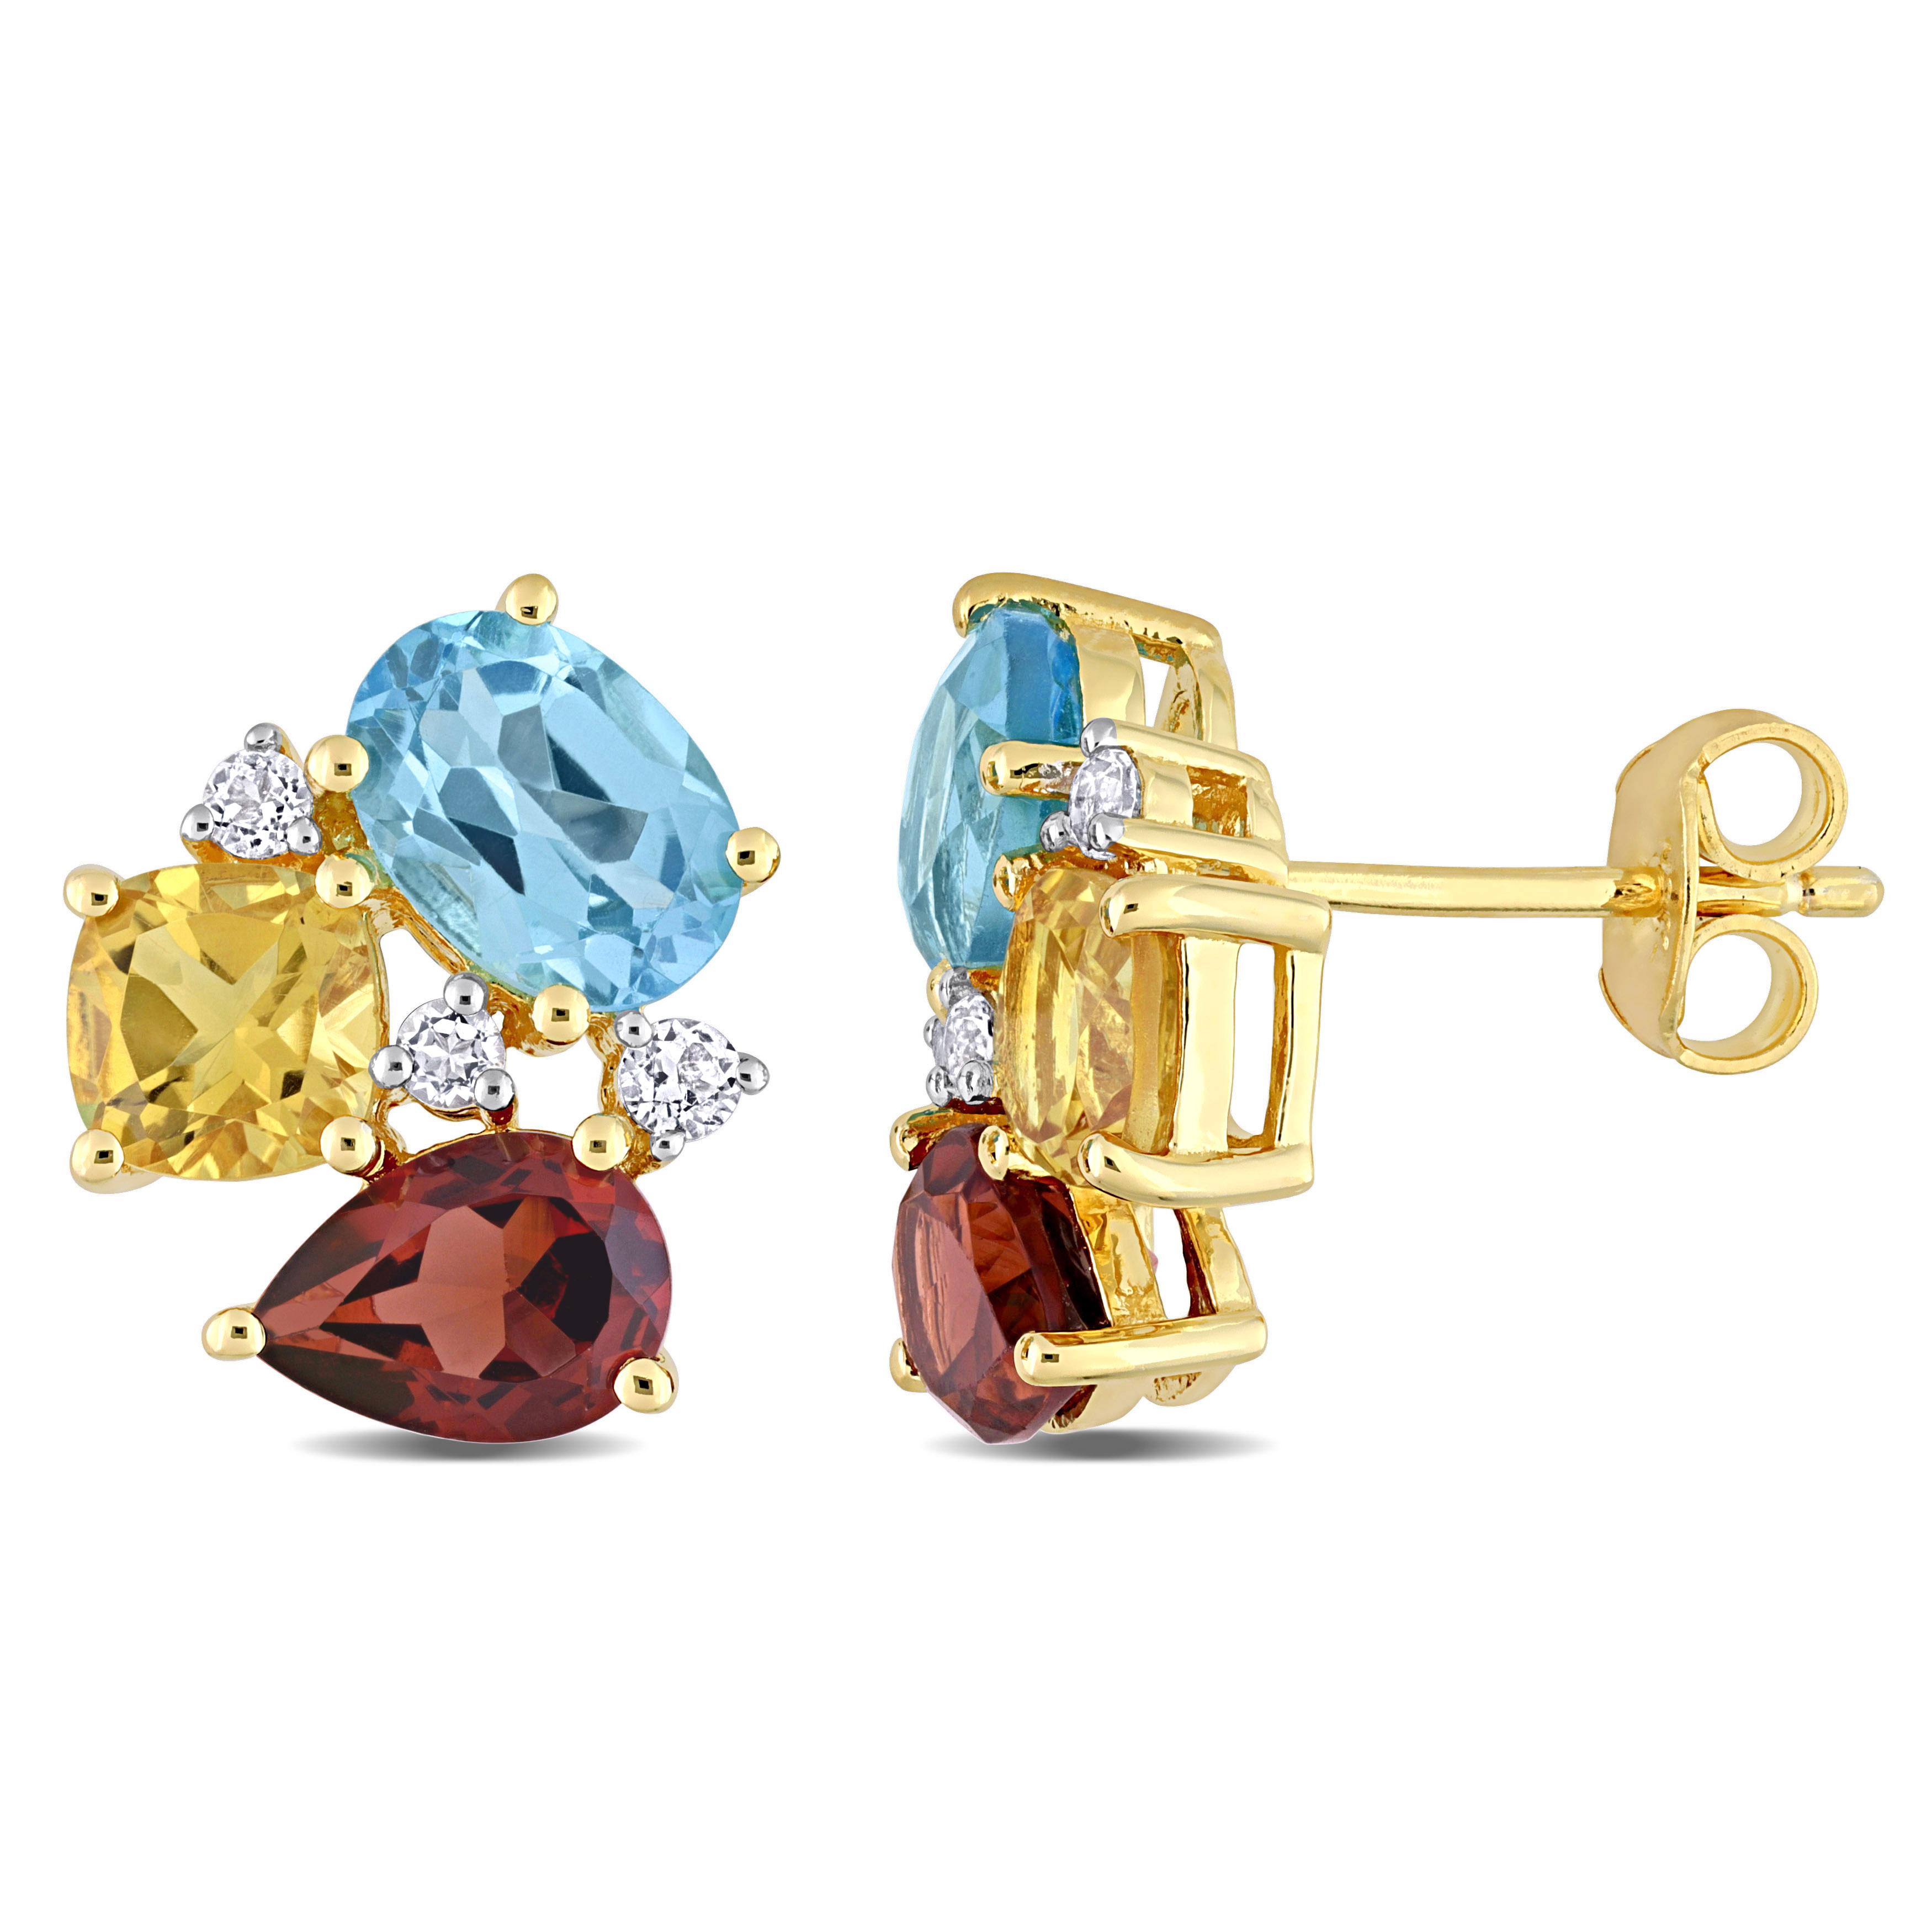 4 7/8 CT TGW Multi-Color Gemstone Stud Earrings in Yellow Plated Sterling Silver